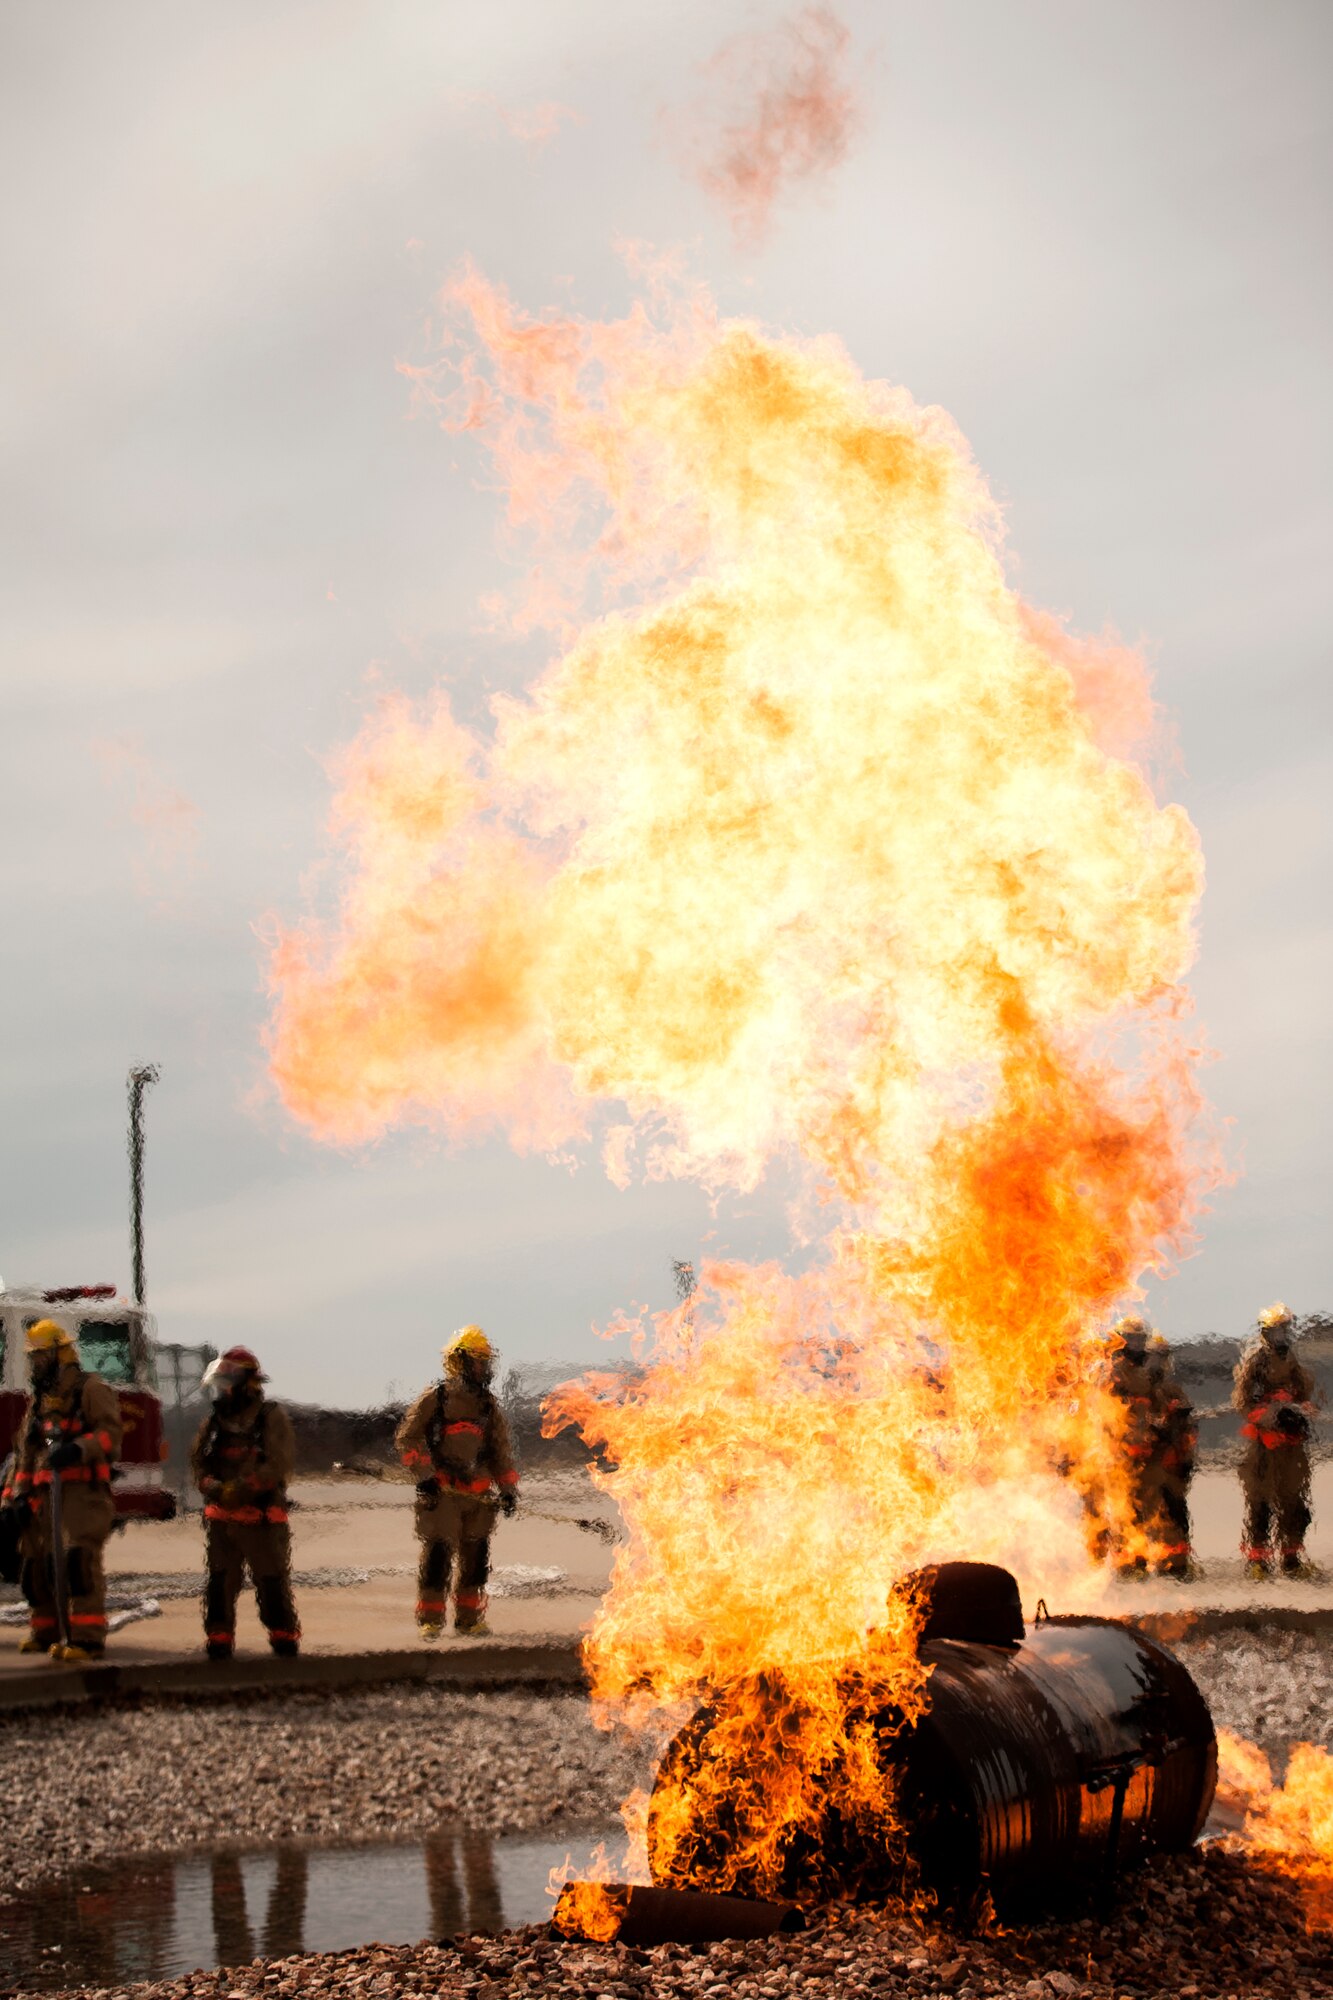 GOODFELLOW AIR FORCE BASE, Texas – A simulation fire burns as students of the 312th Training Squadron prepare to extinguish it, at the Louis F. Garland Department of Defense Fire Fighting Academy, Feb. 3. This is just one of the many static exercises the students engage in for putting out fires.
(U.S. Air Force photo/ Senior Airman Scott Jackson)
